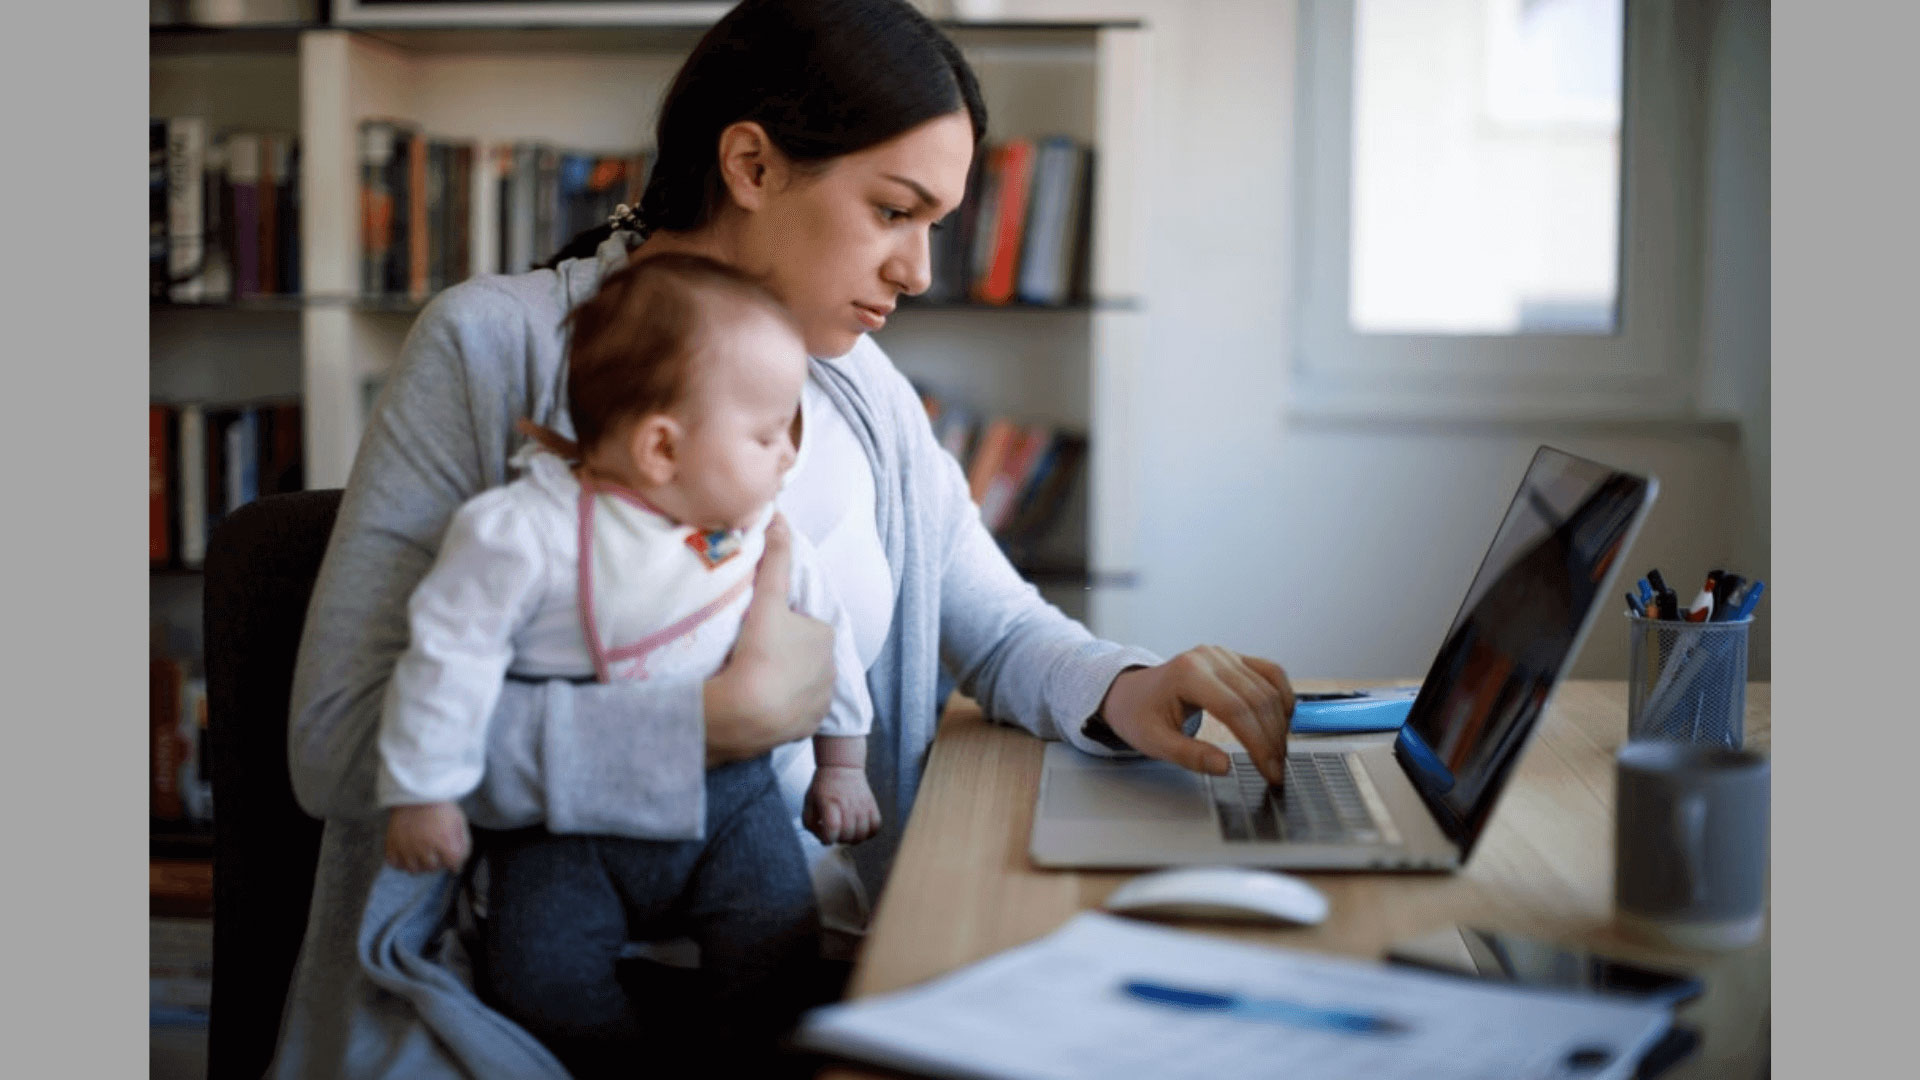 11 tips for working from home with kids around that ACTUALLY work